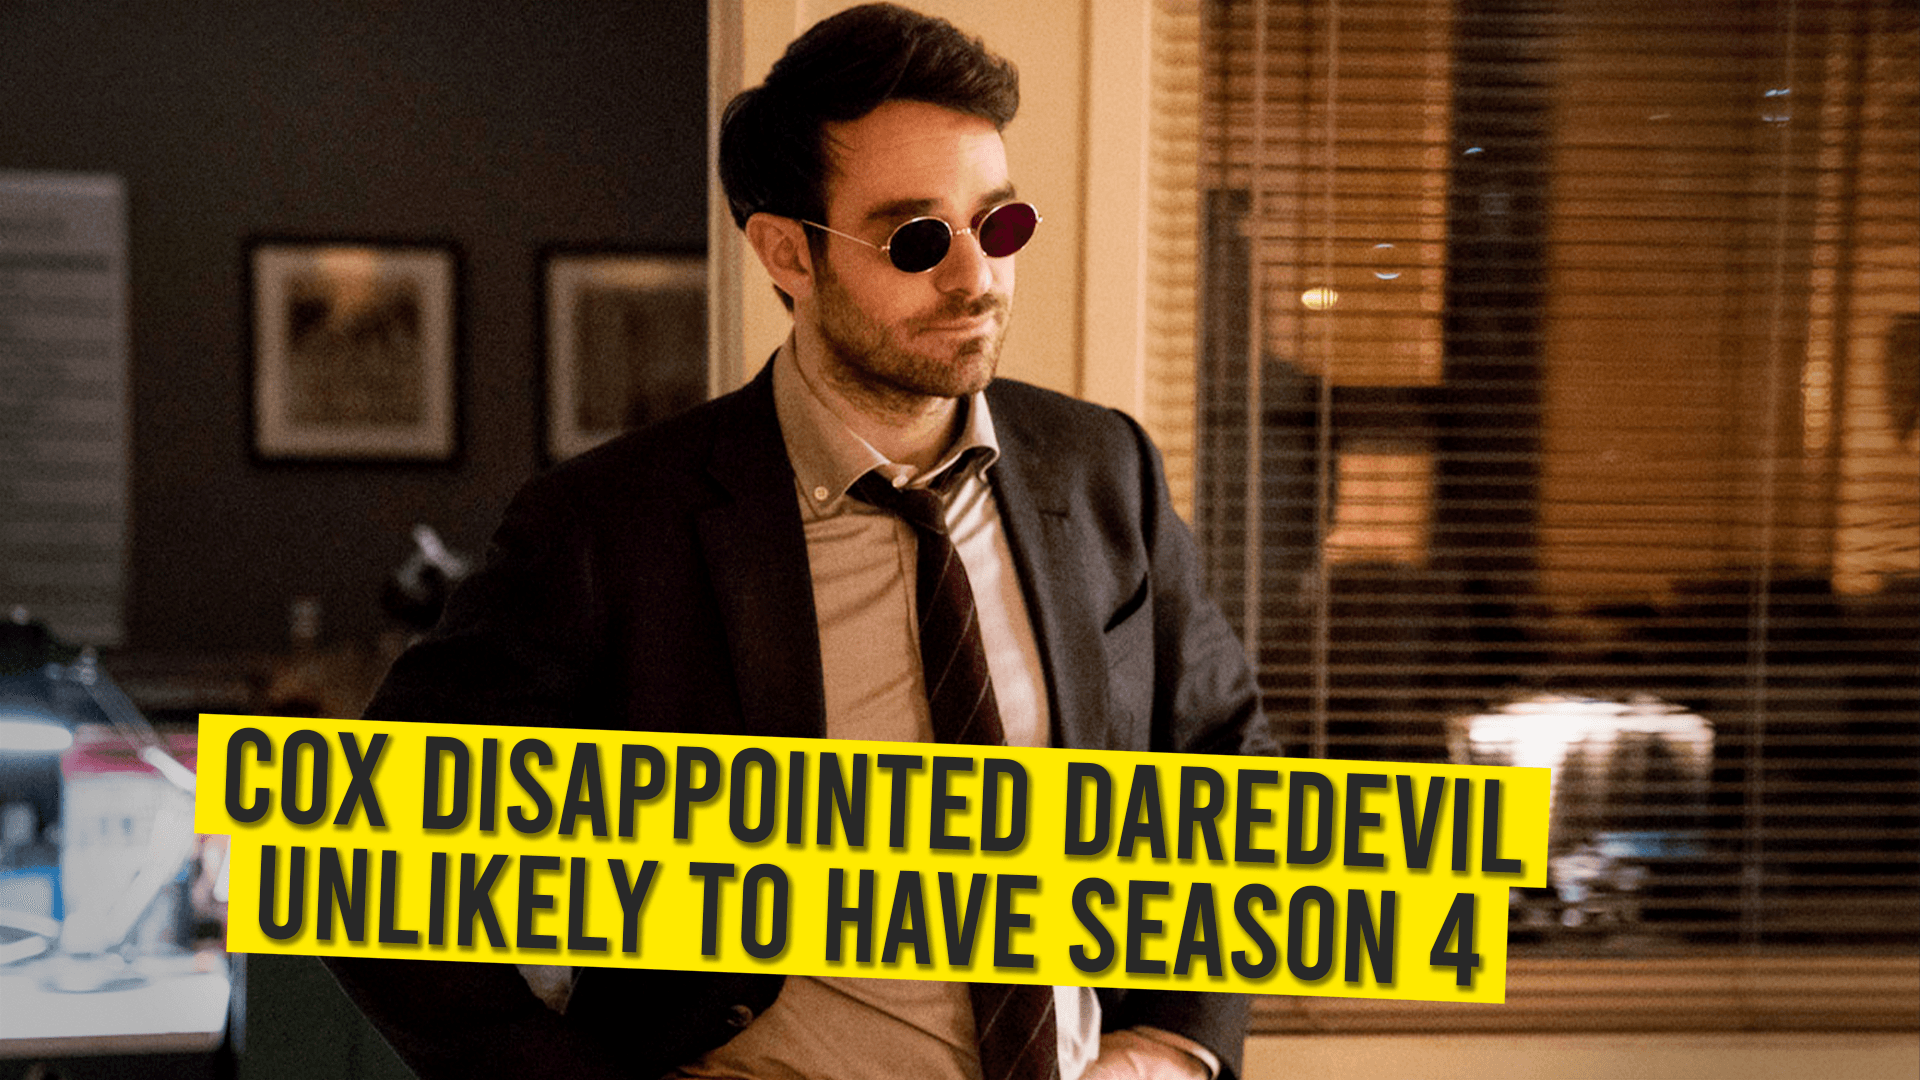 Charlie Cox Disappointed As Daredevil Unlikely To Have Season 4